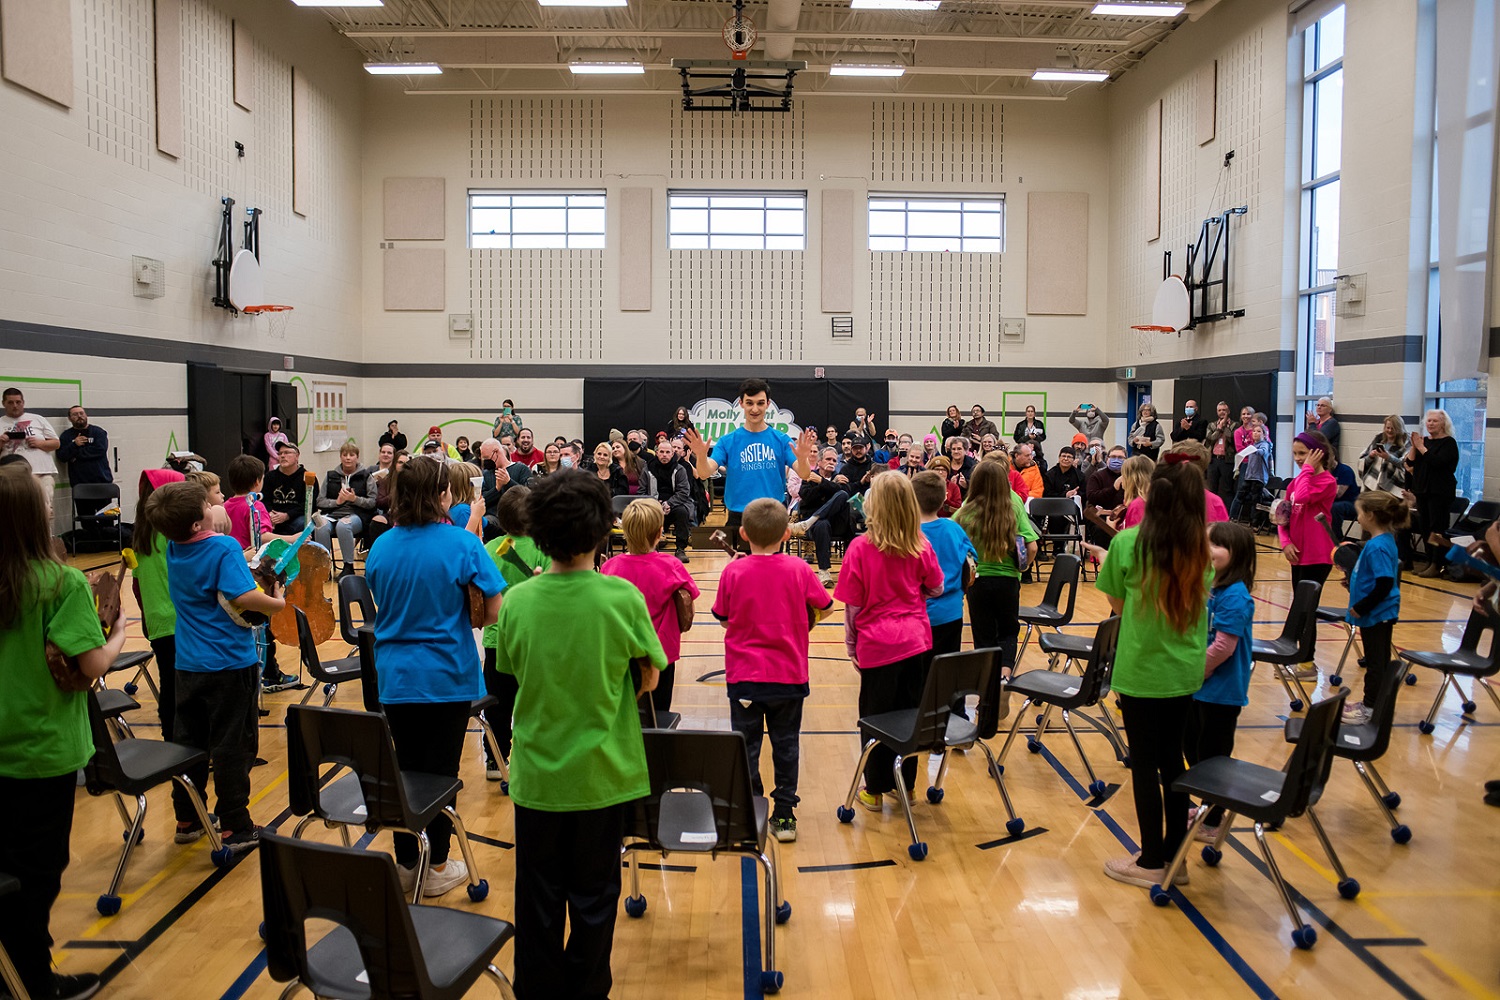 A view of Sistema Kingston students performing at a concert. Their backs face the camera and they face their parents sitting in the audience.